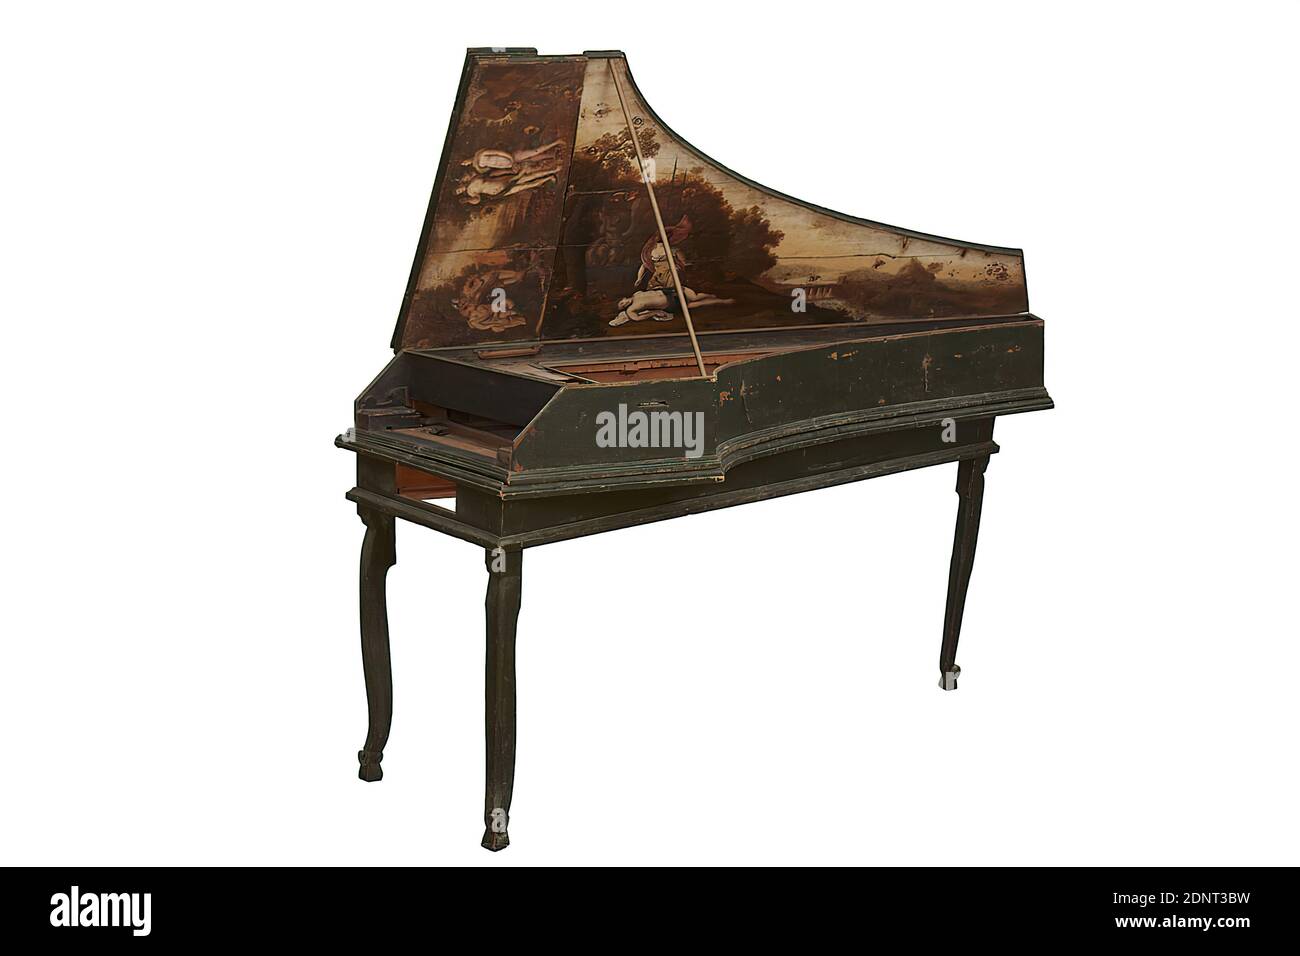 Harpsichord, Conifer, Wood, Total: Length: 2054 mm; Width: 815 mm; Height: 209 mm; Weight: 18,5 kg, unmarked, Keyboard instruments, Classical Mythology/Antique History, Venus and Cupido, Baroque Stock Photo